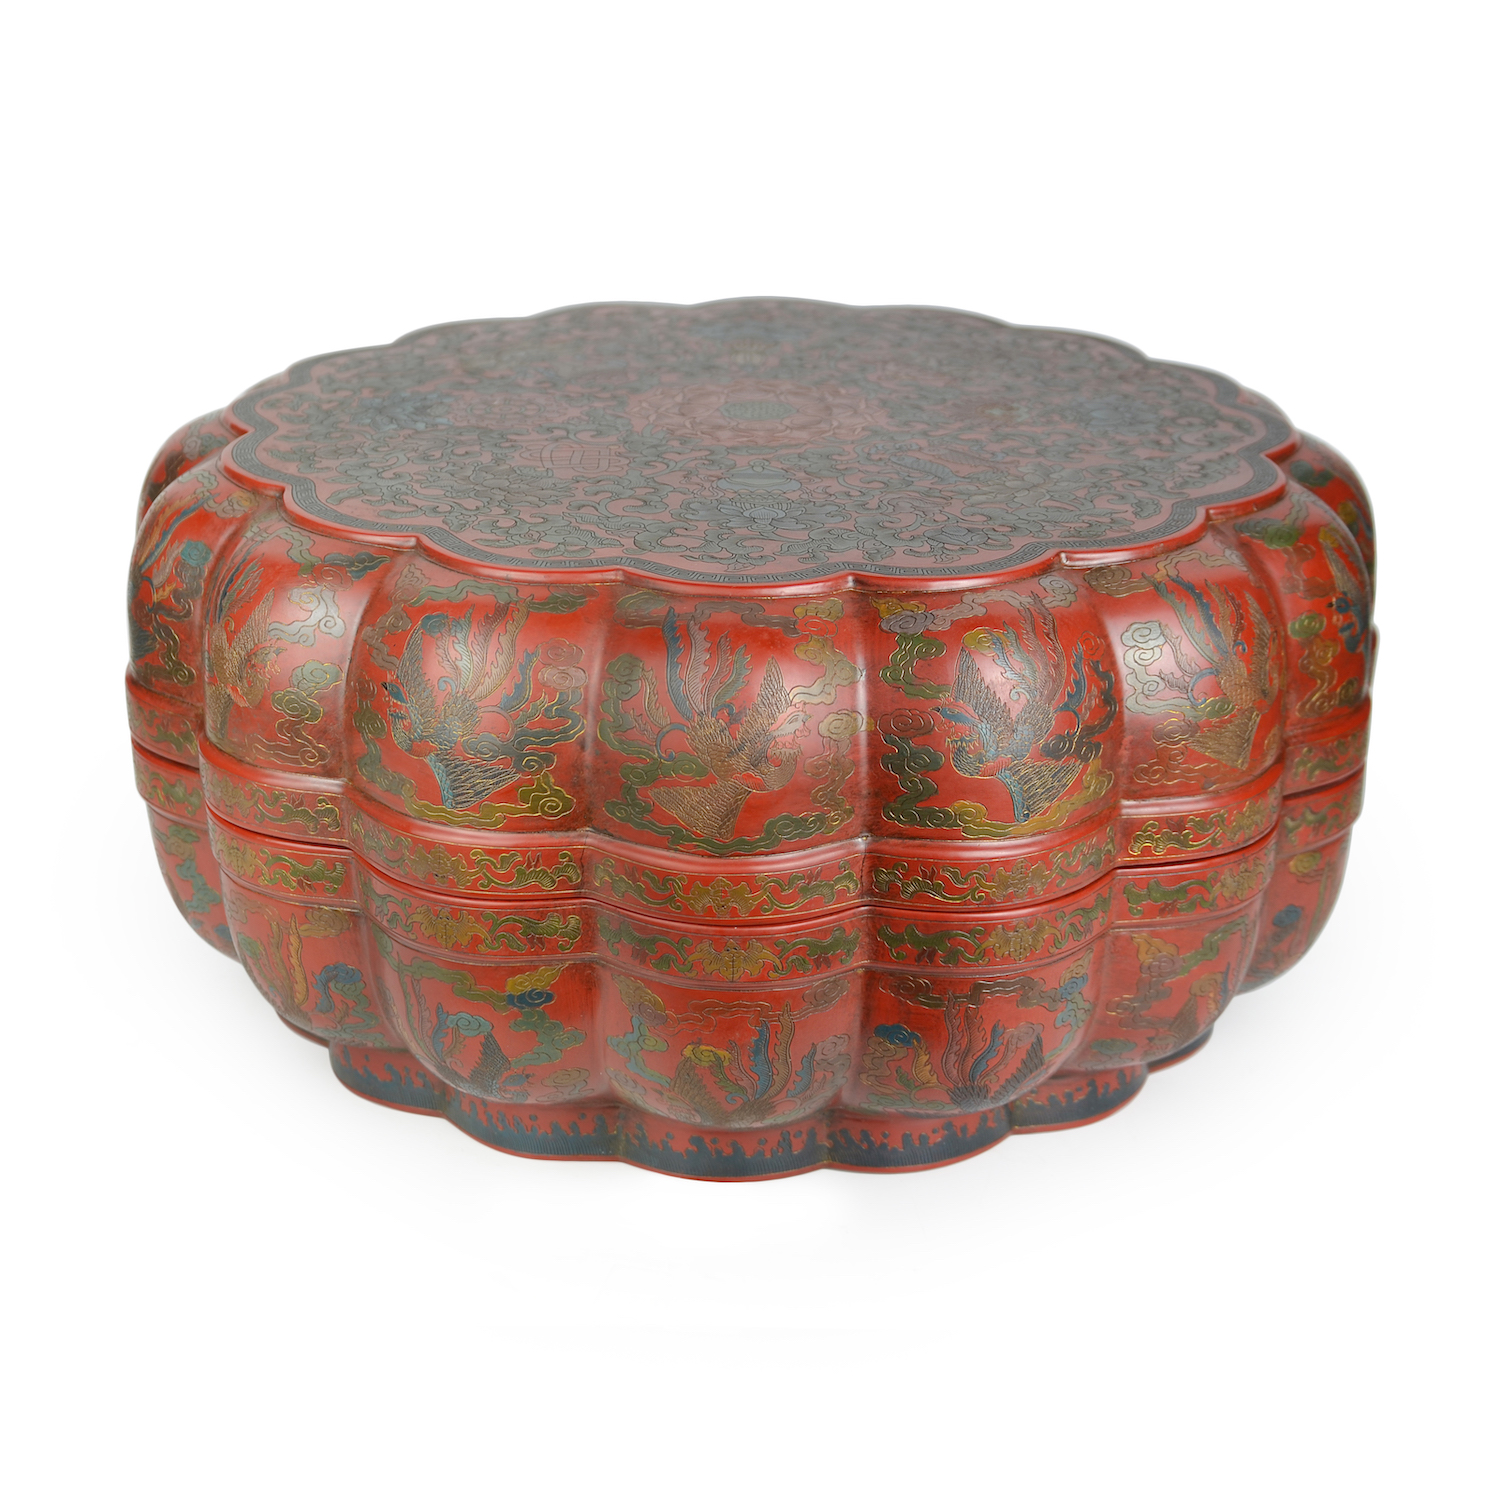 16-lobe lacquer box with incising and color. Gianguan Auctions, June 17th, 2019.